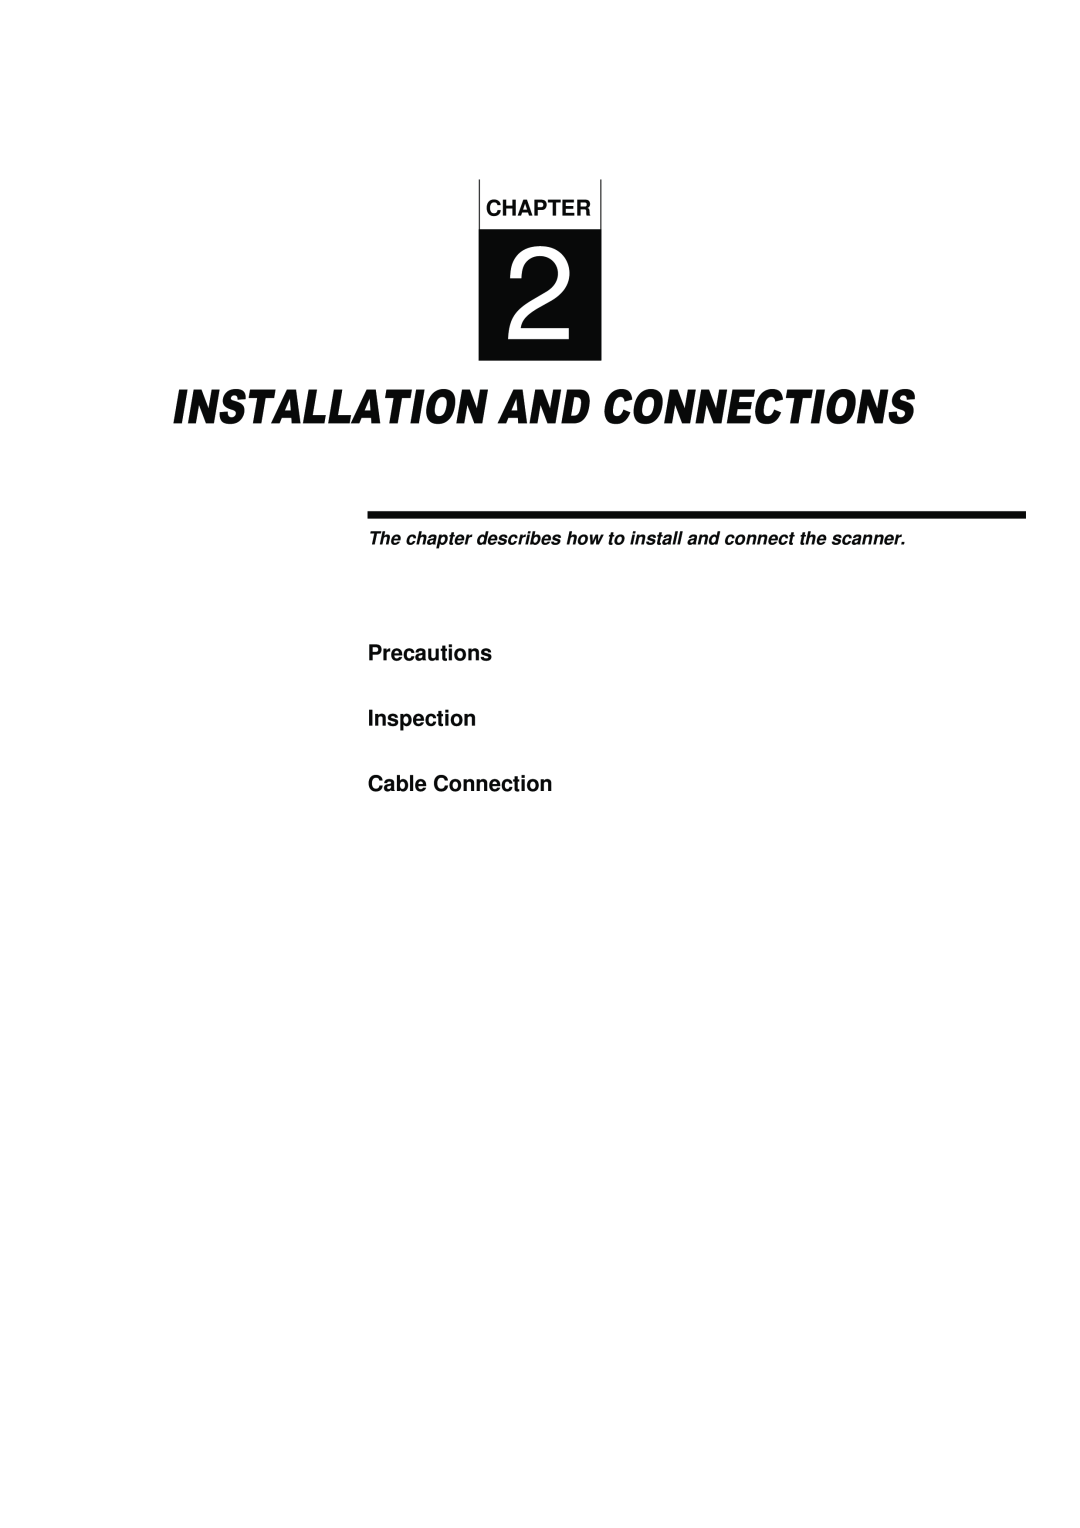 Fujitsu fi-4990C manual Installation And Connections, Precautions Inspection Cable Connection, Chapter 